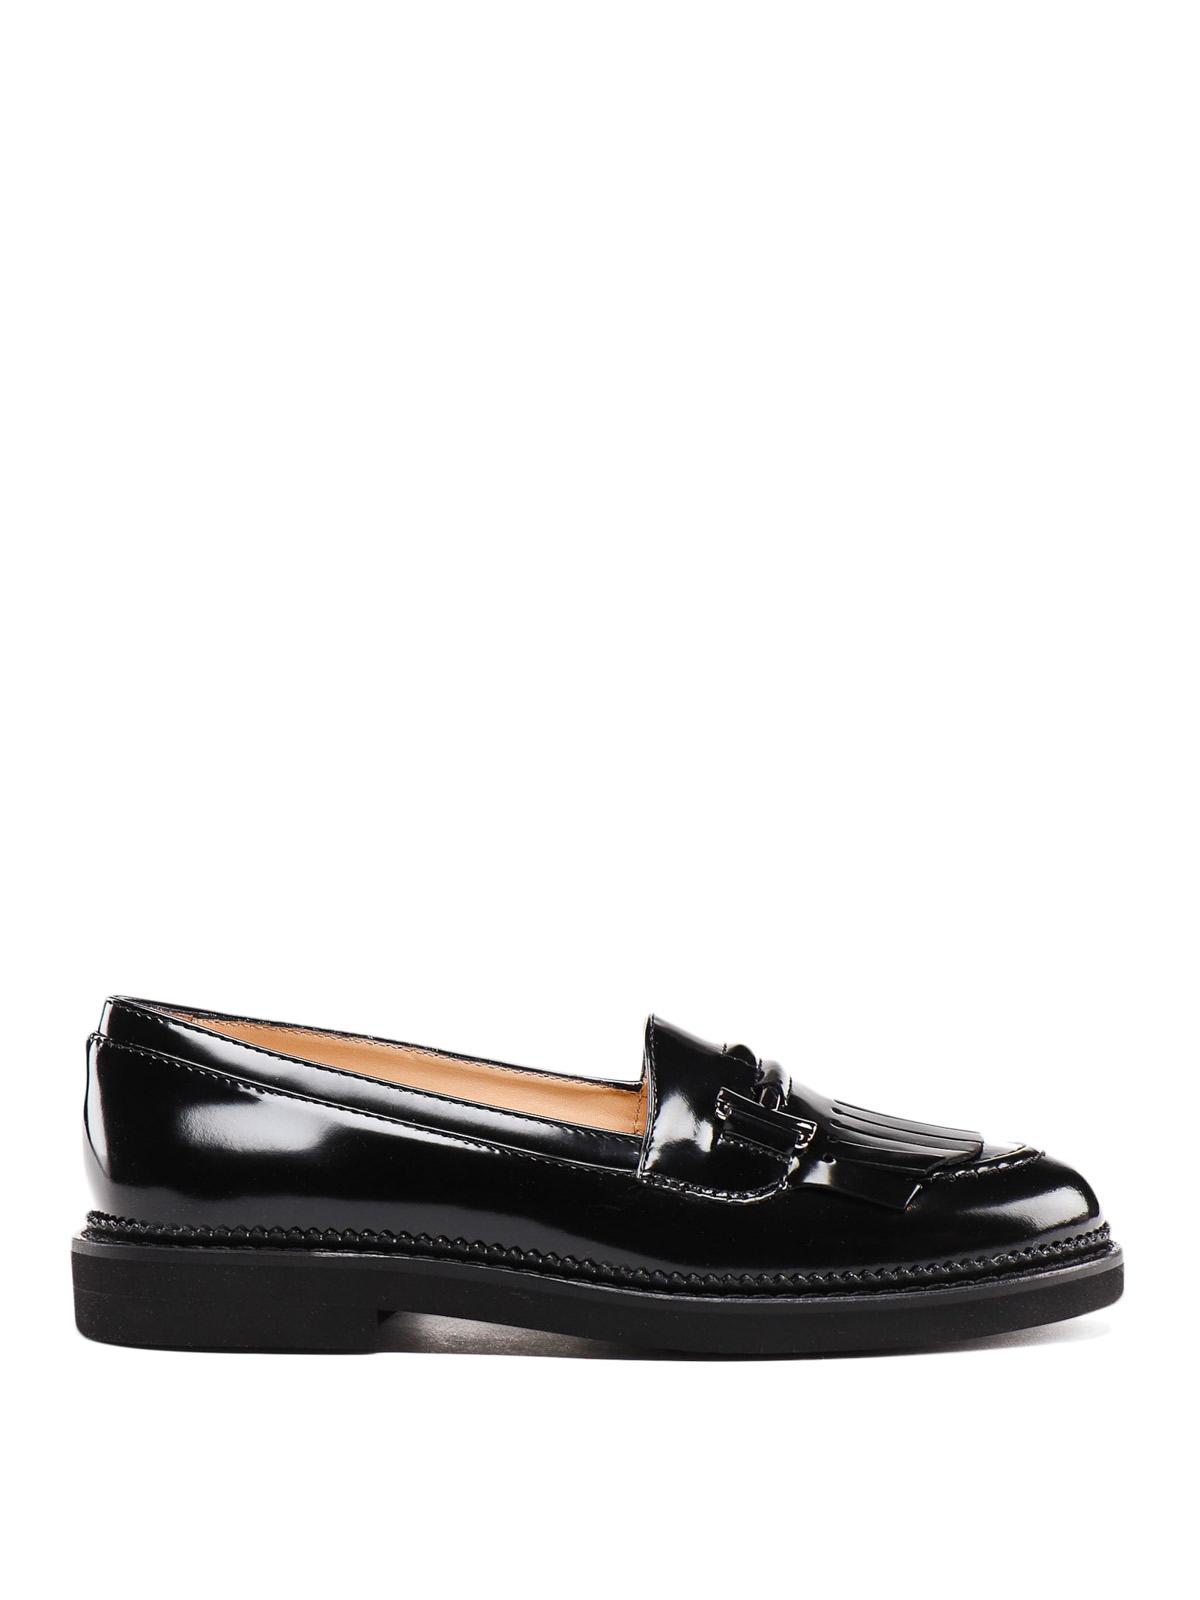 Tod's Fringed Patent Leather Loafers in Black - Lyst